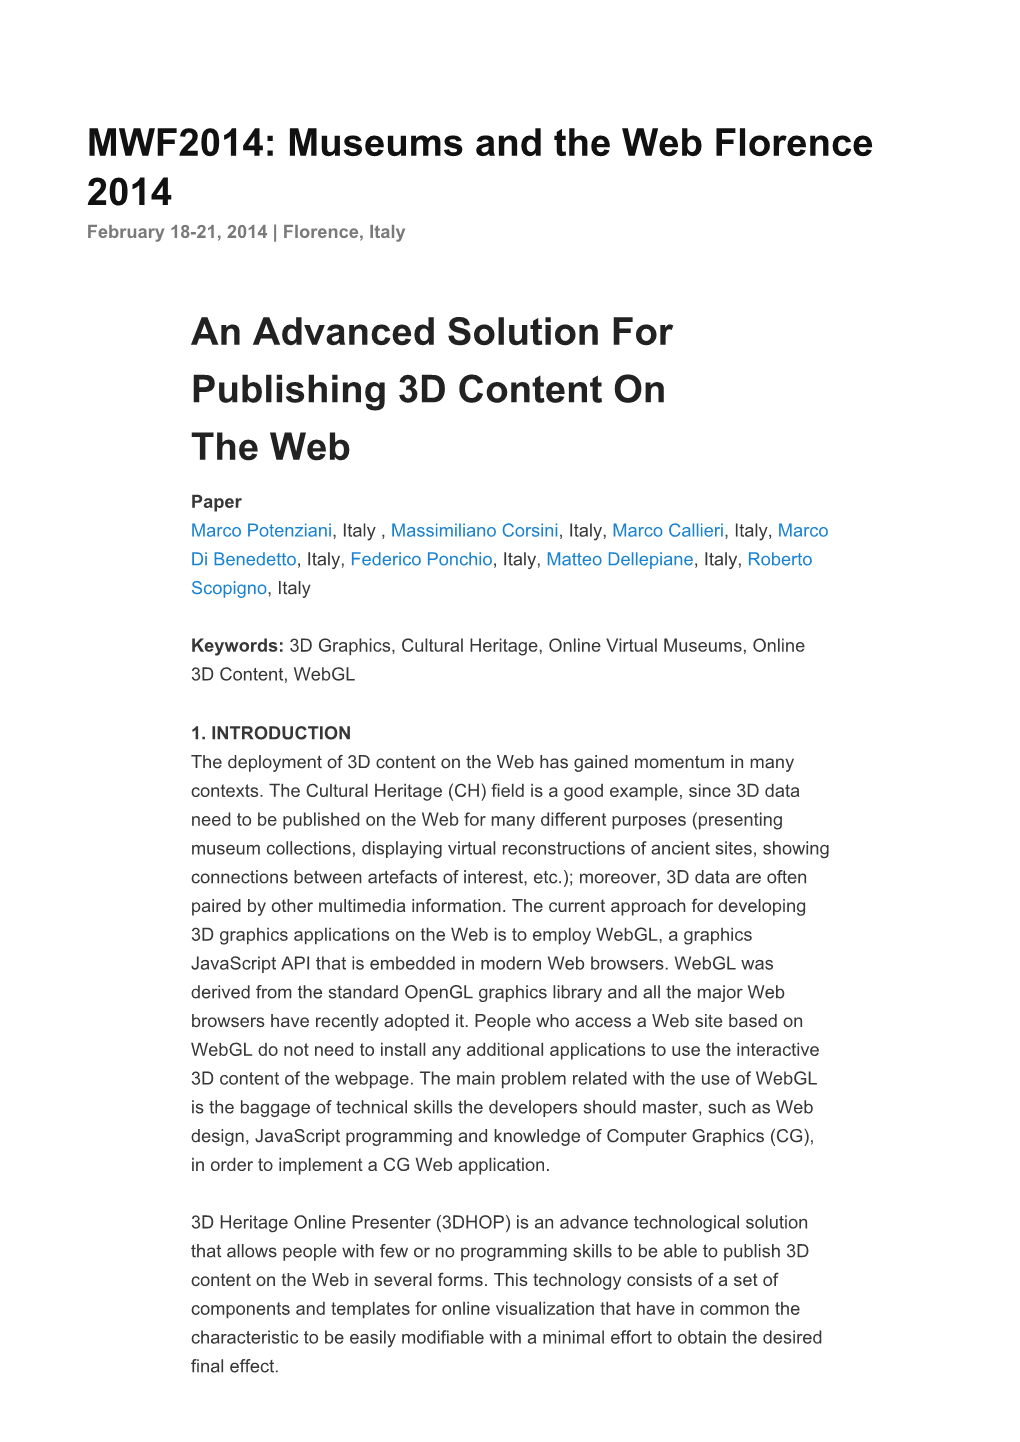 An Advanced Solution for Publishing 3D Content on the Web